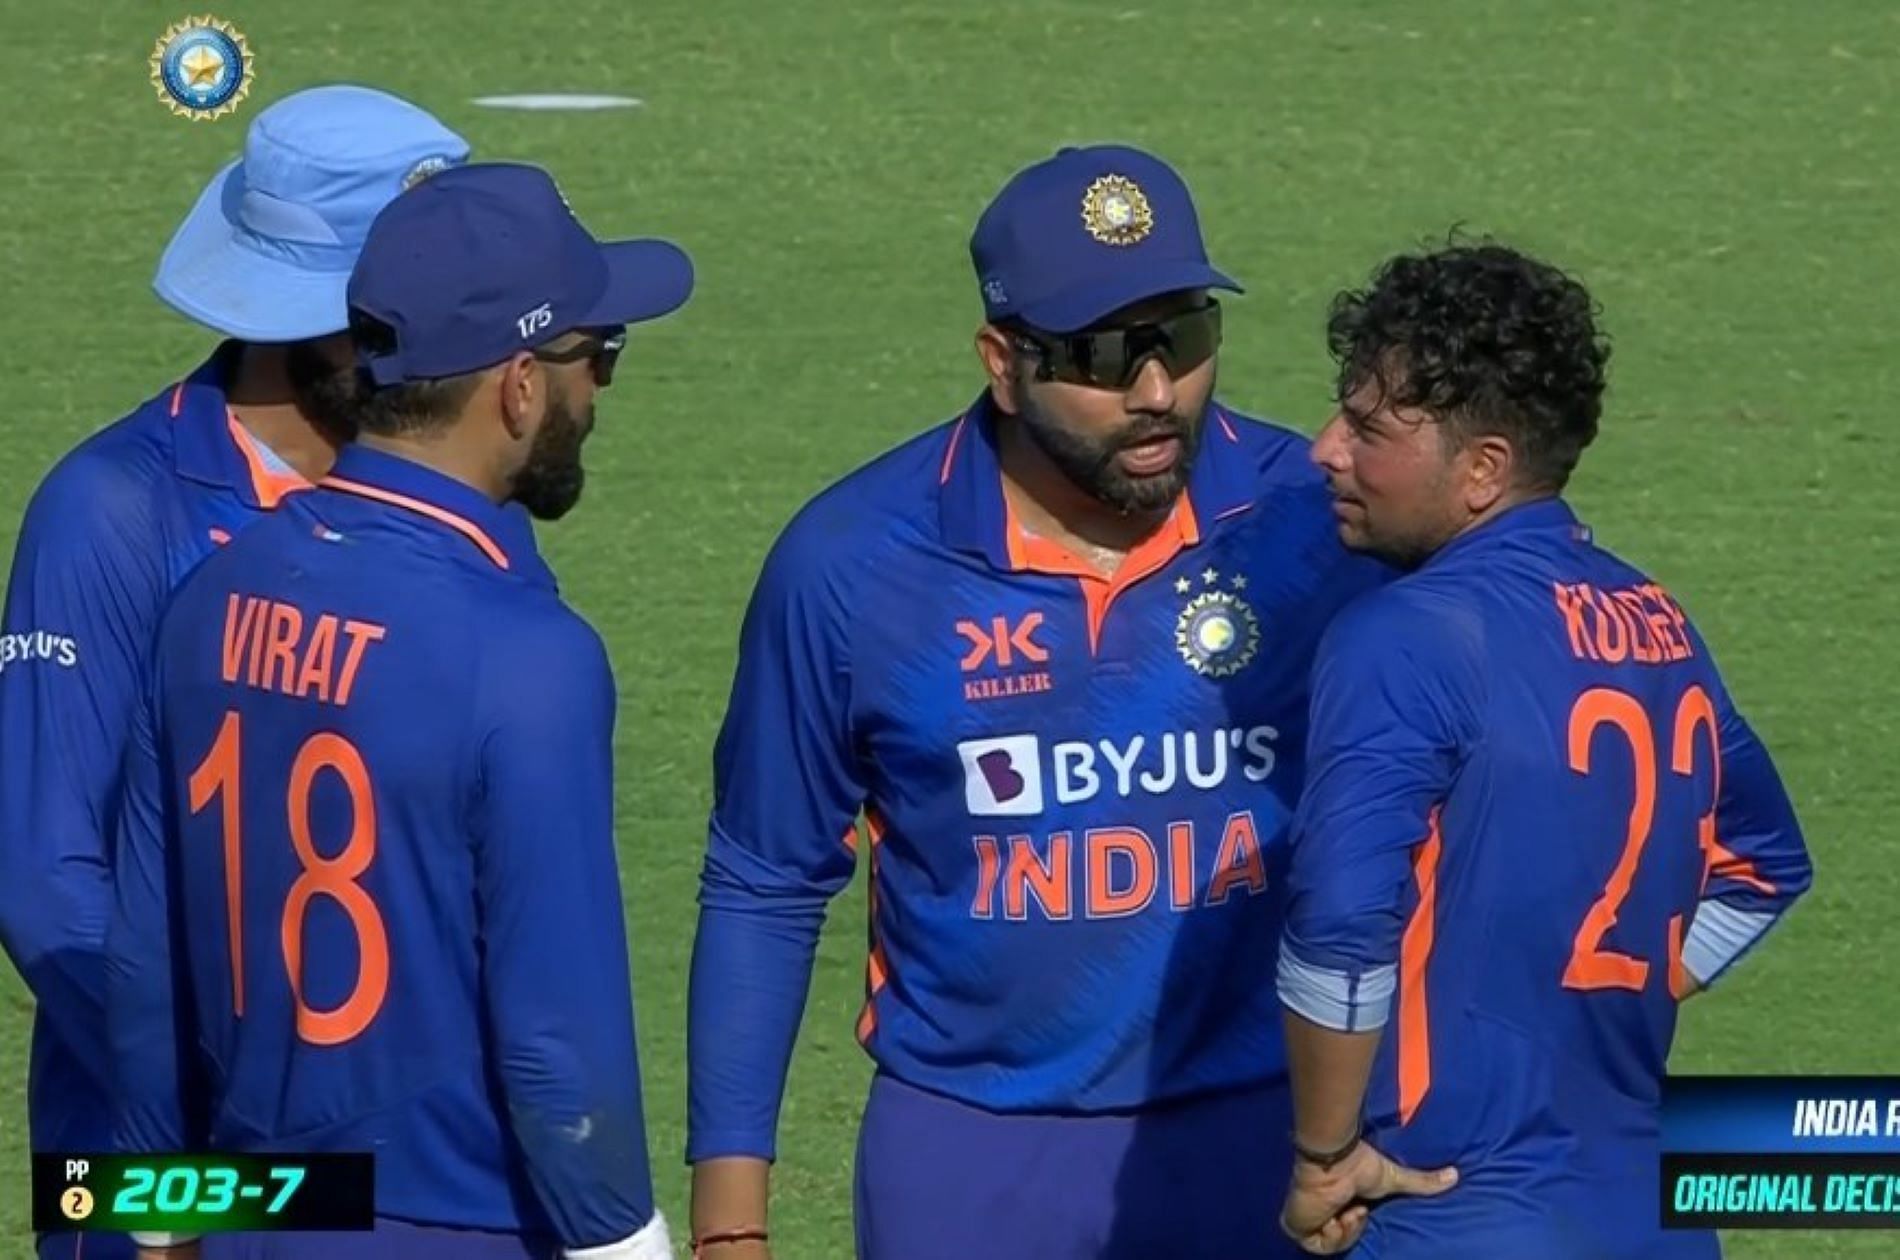 Rohit was all smiles before fuming at Kuldeep Yadav after wasted DRS Review